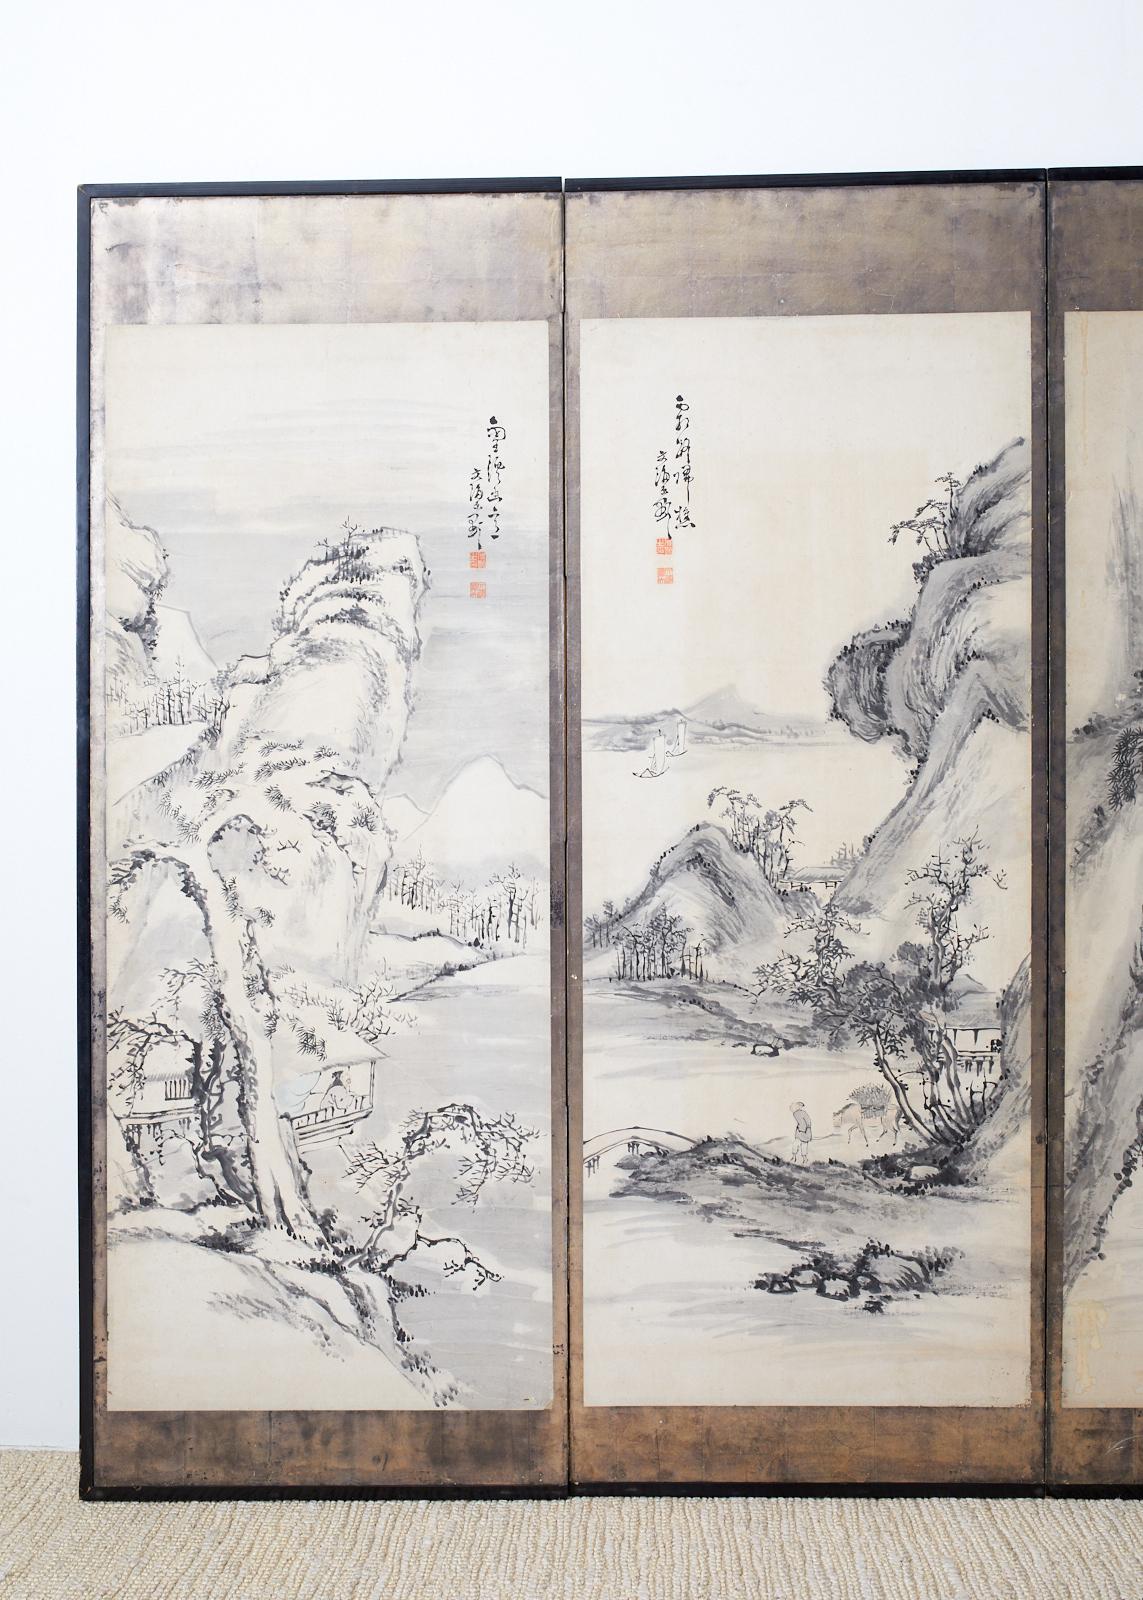 Impressive and large Japanese 19th century late Edo period six panel screen of mountain landscapes with figures. Each panel is presented with five character Chinese seasonal titles, and artist signature 